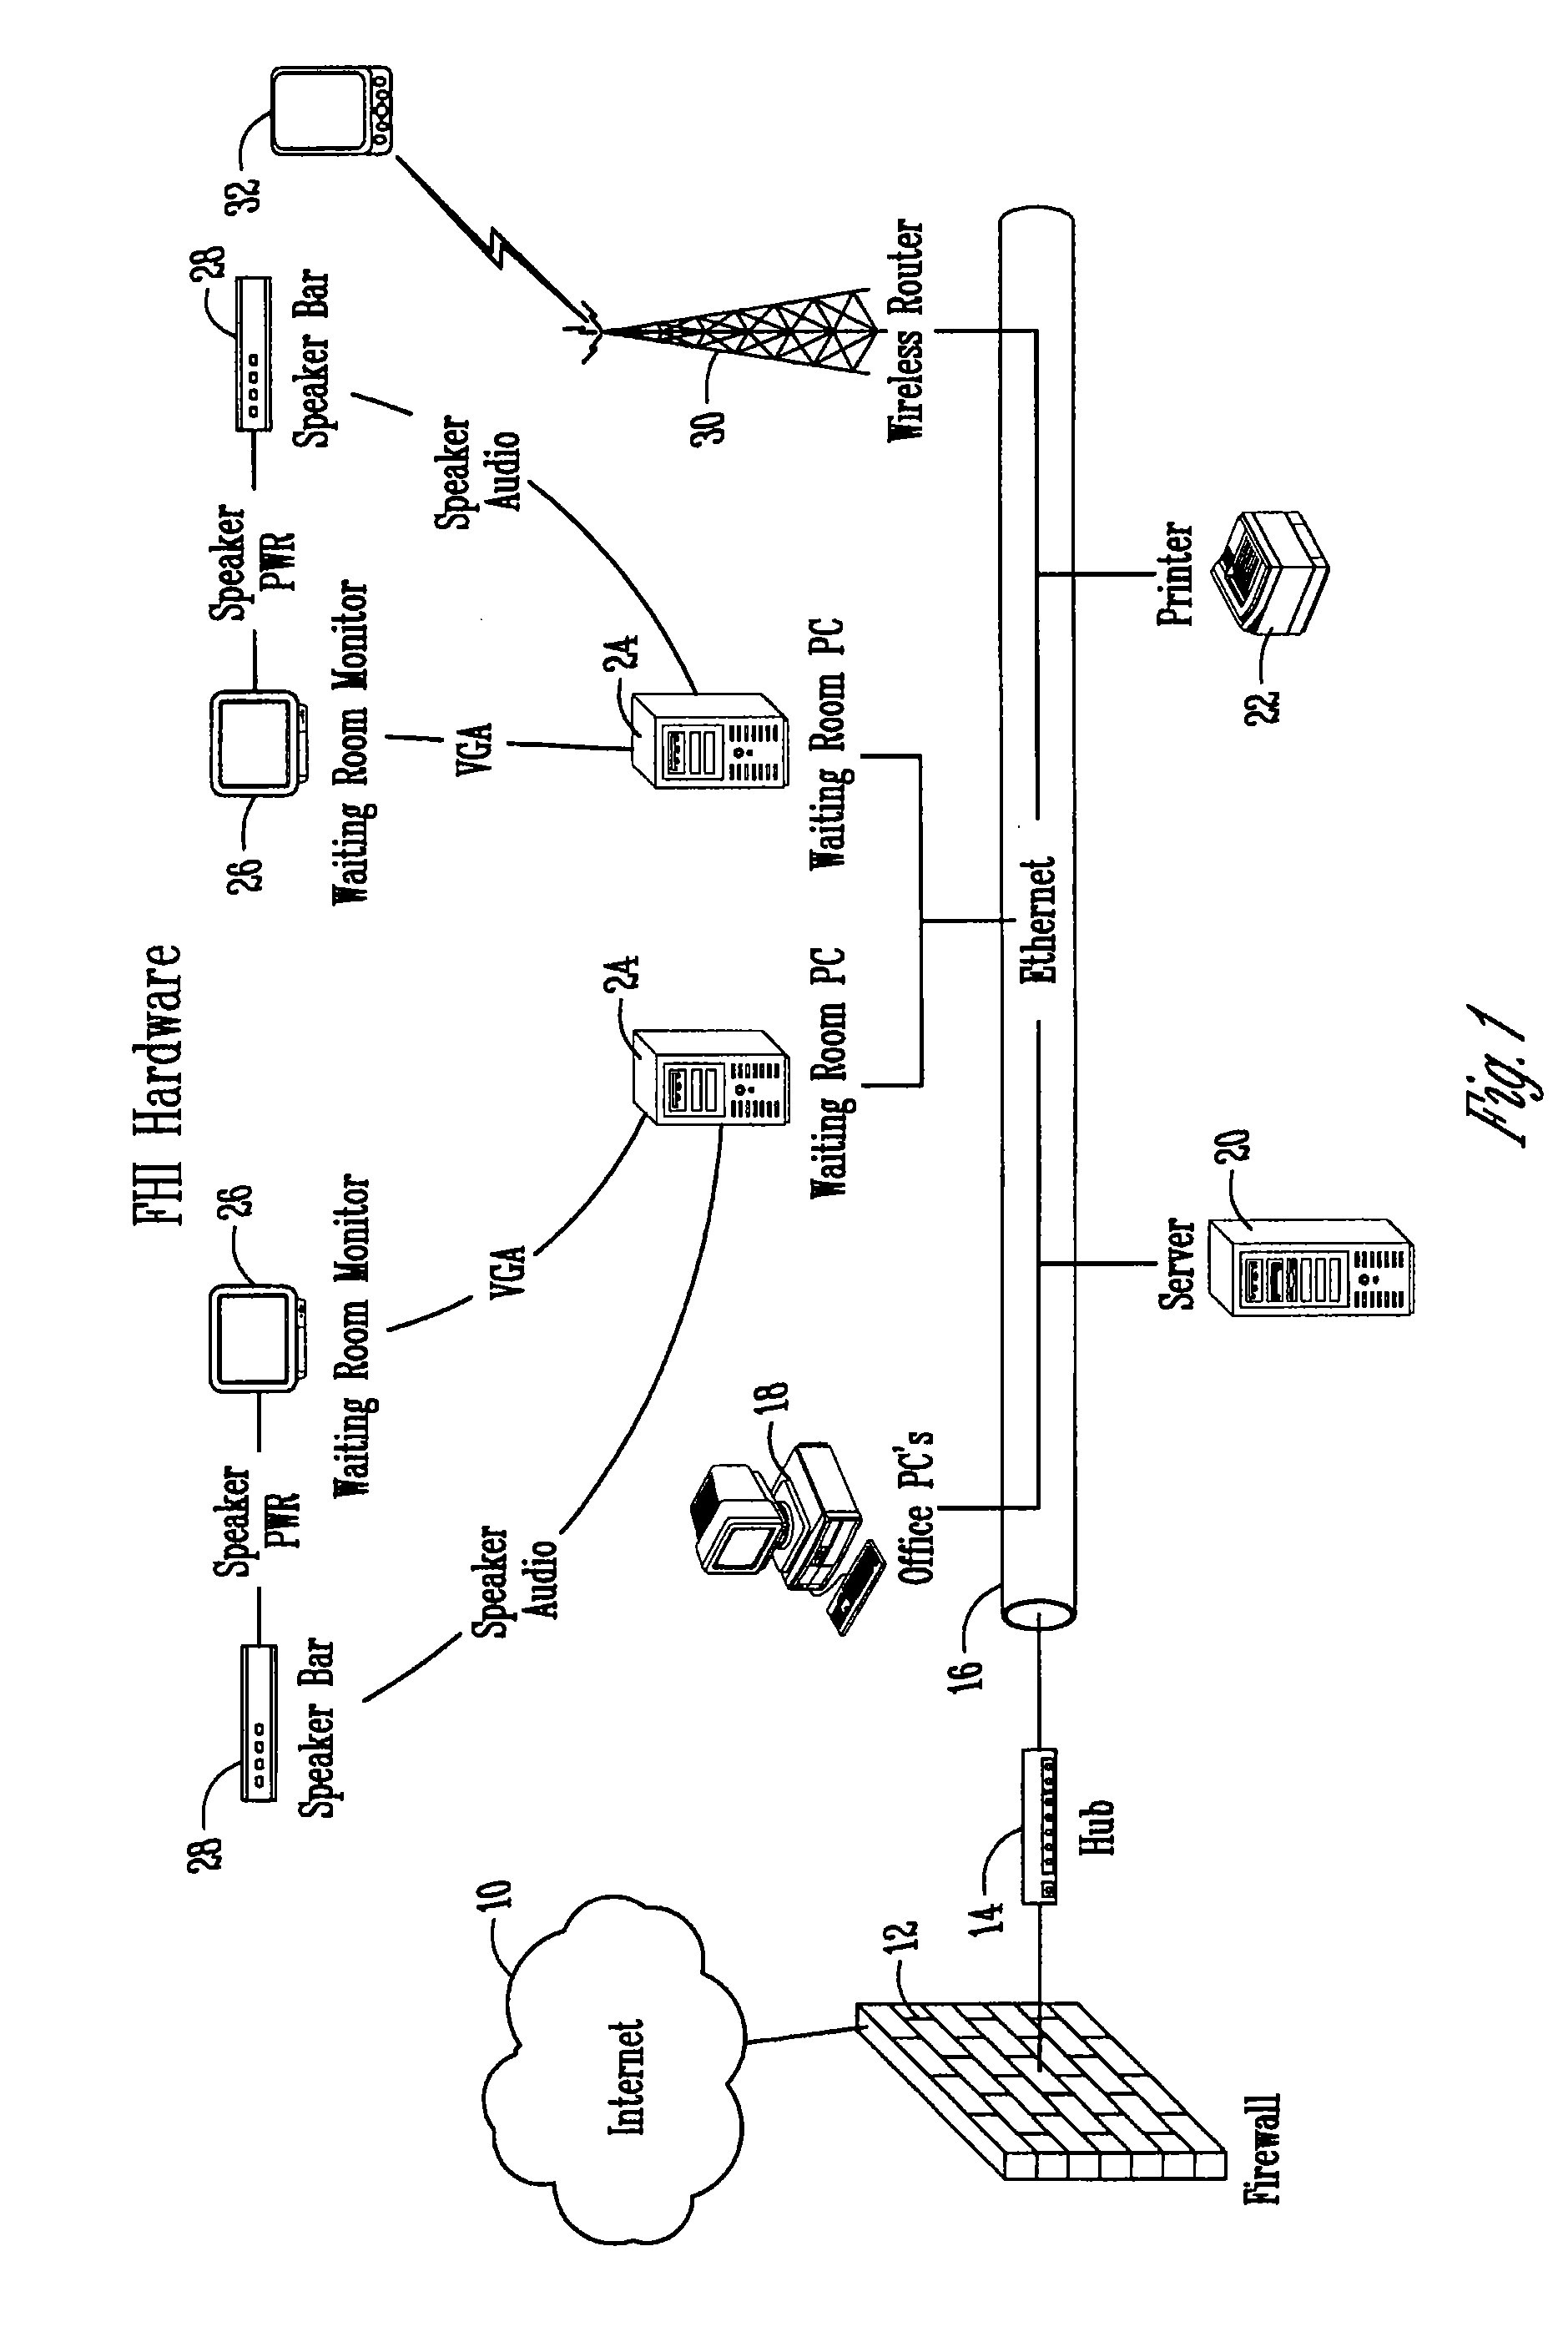 Apparatus and method for digital imaging, education, and internal marketing software and system